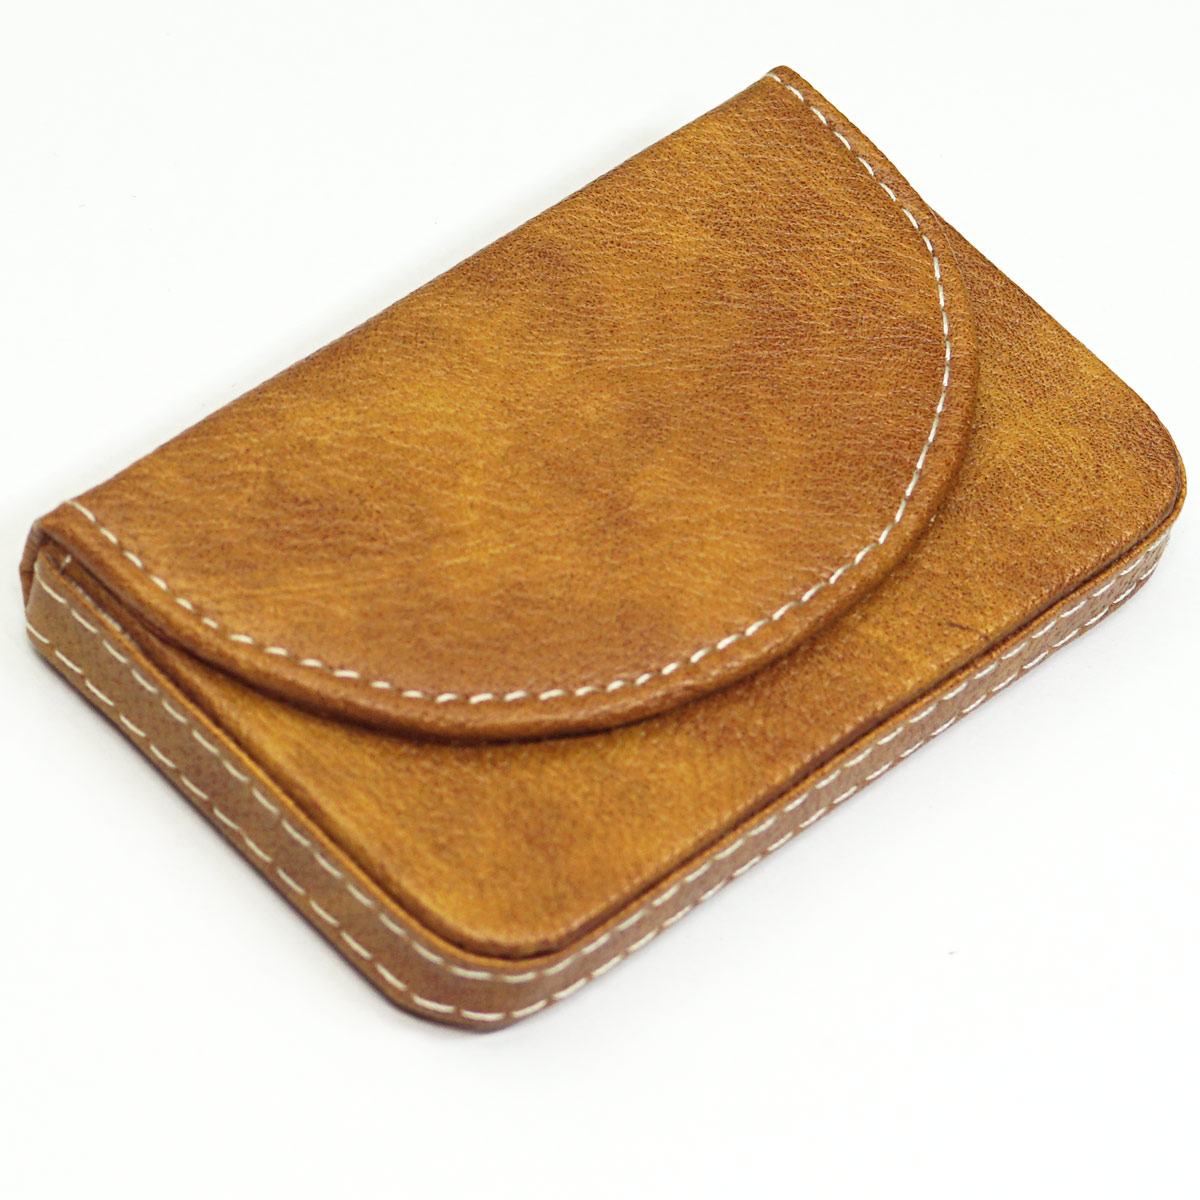 penhouse.in Light Brown Color With Flip Type Leather Type Visiting Card Holder SKU 87173